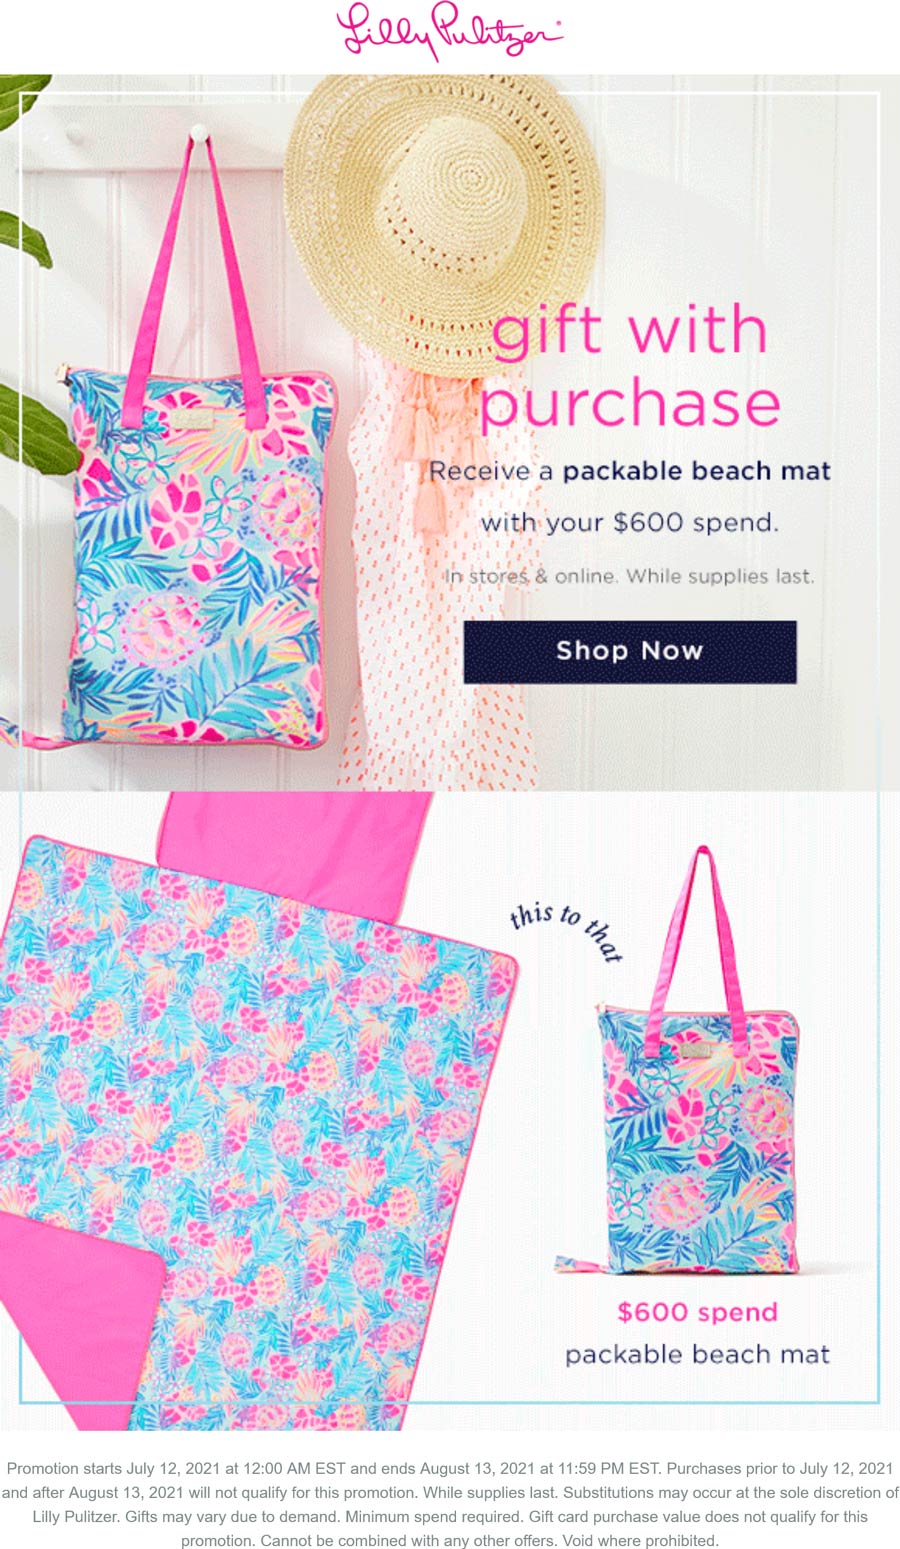 Free packable beach mat with 600 spent at Lilly Pulitzer, ditto online